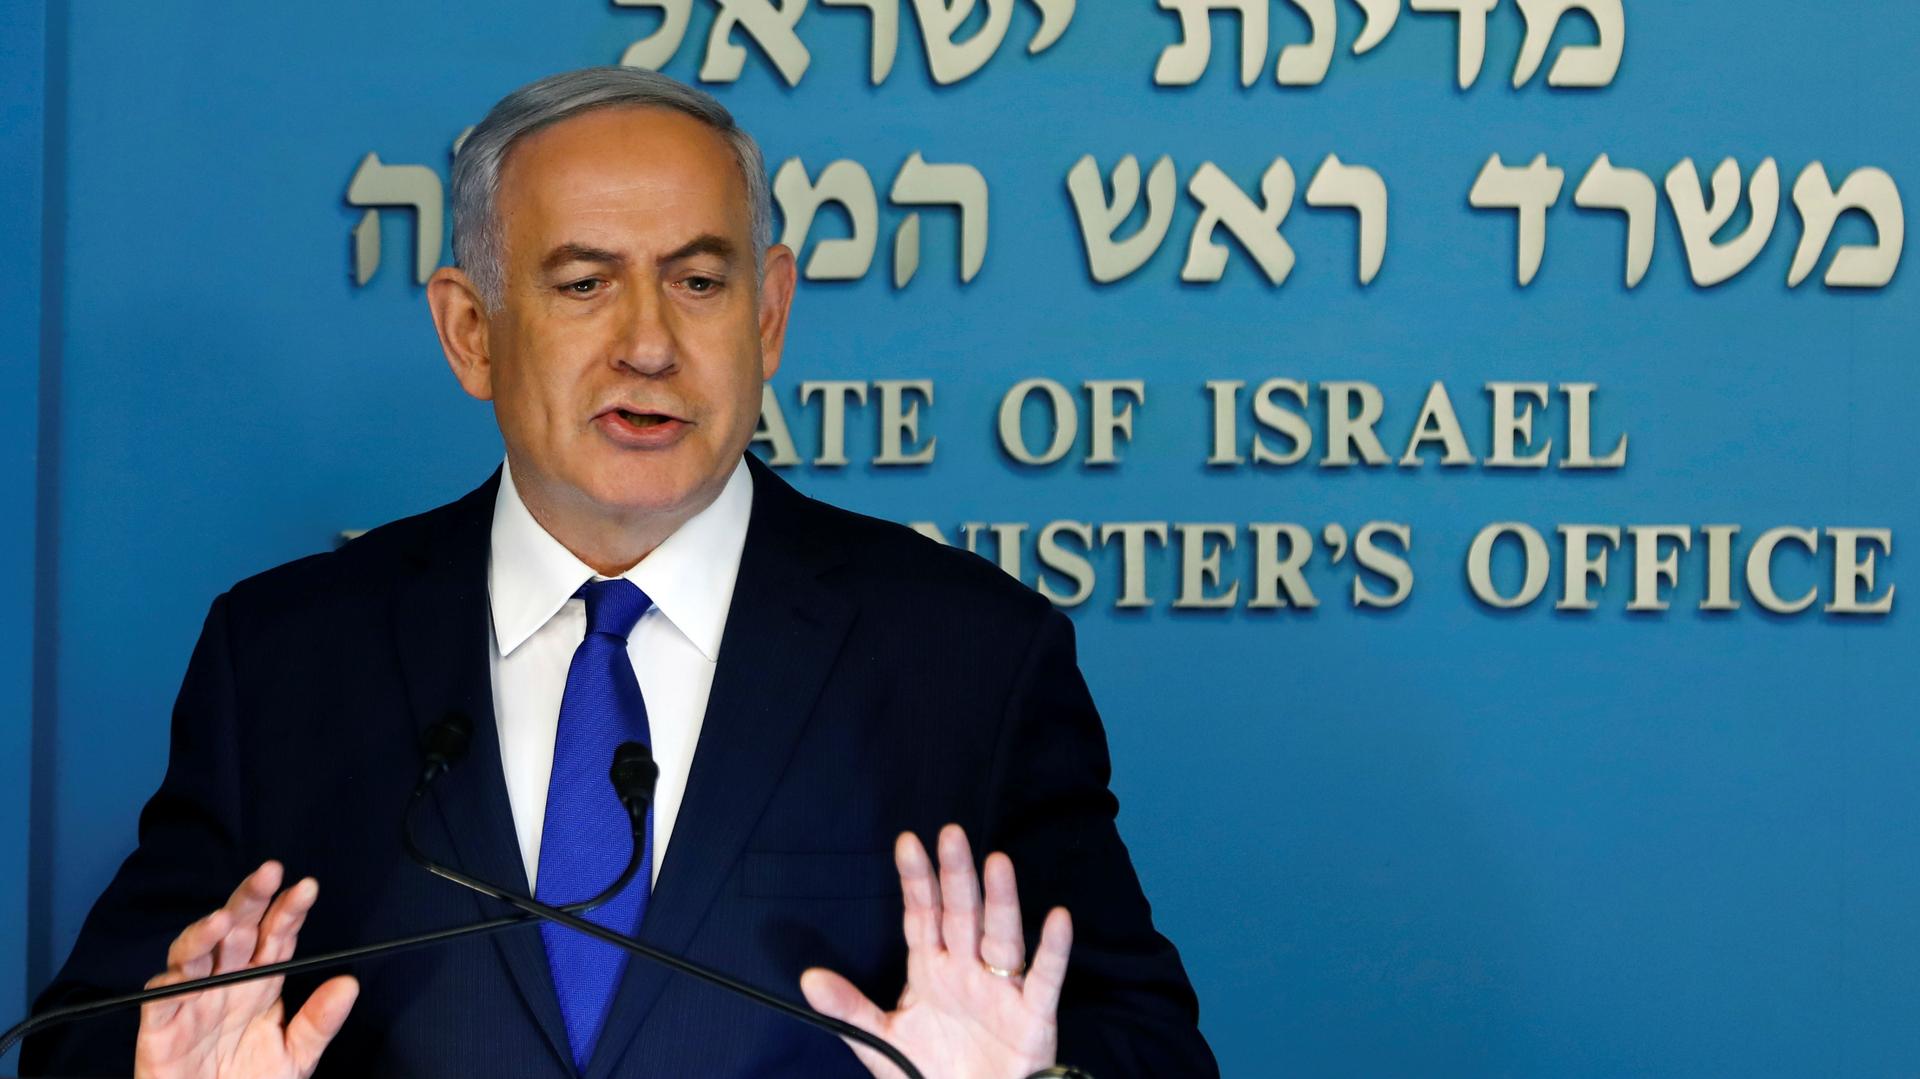 Israeli Prime Minister Benjamin Netanyahu speaks at a lectern before a blue background during a news conference at the Prime Minister's office in Jerusalem on April 2, 2018.